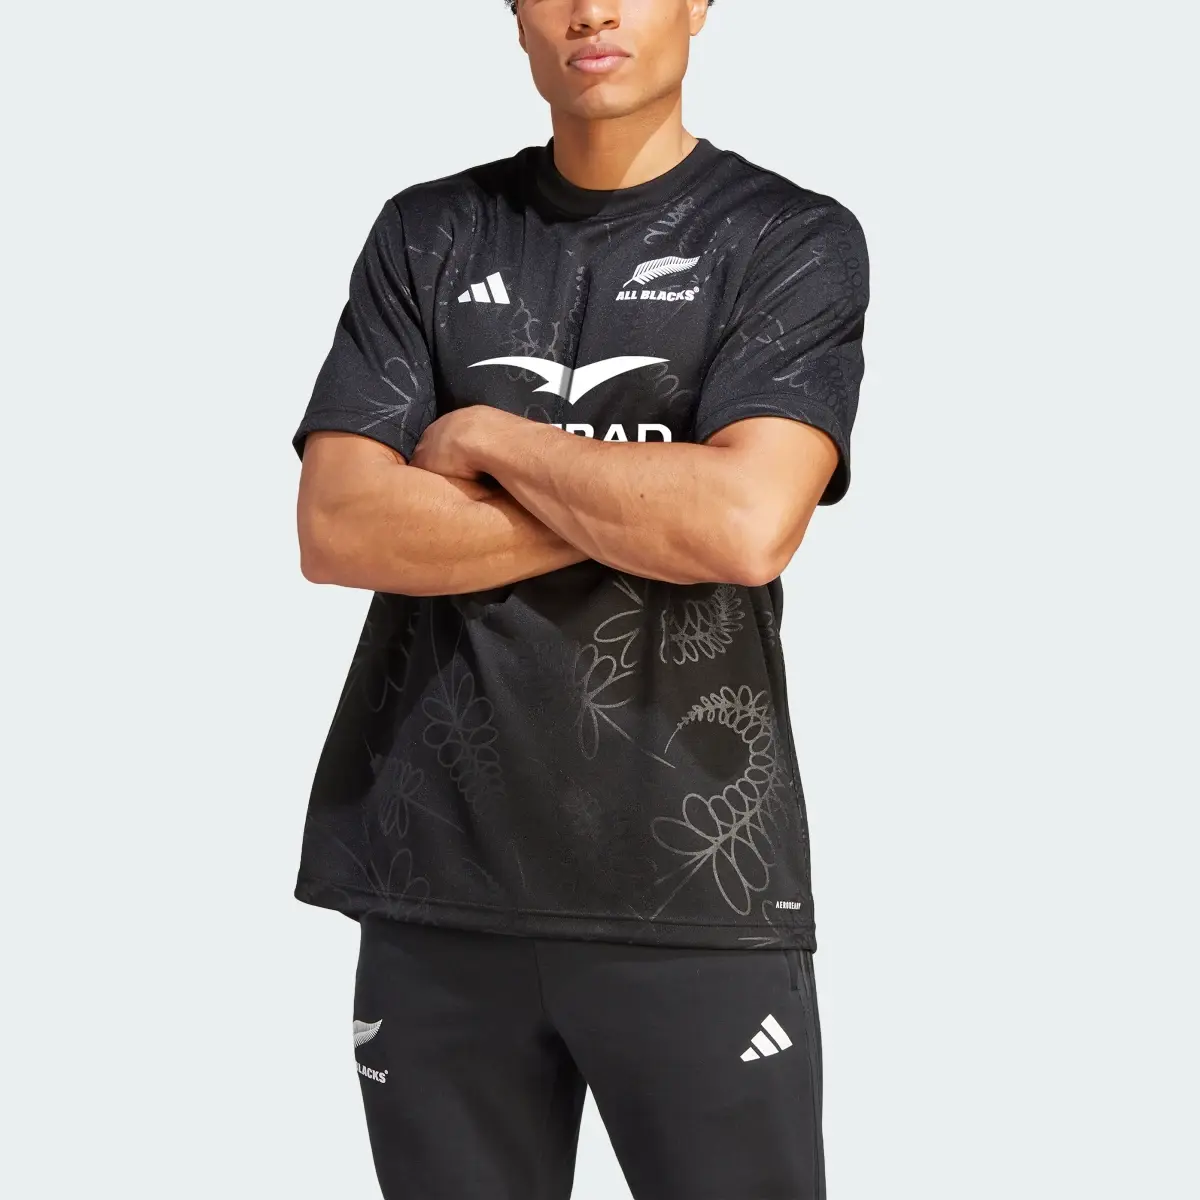 Adidas All Blacks Rugby Supporters T-Shirt. 1